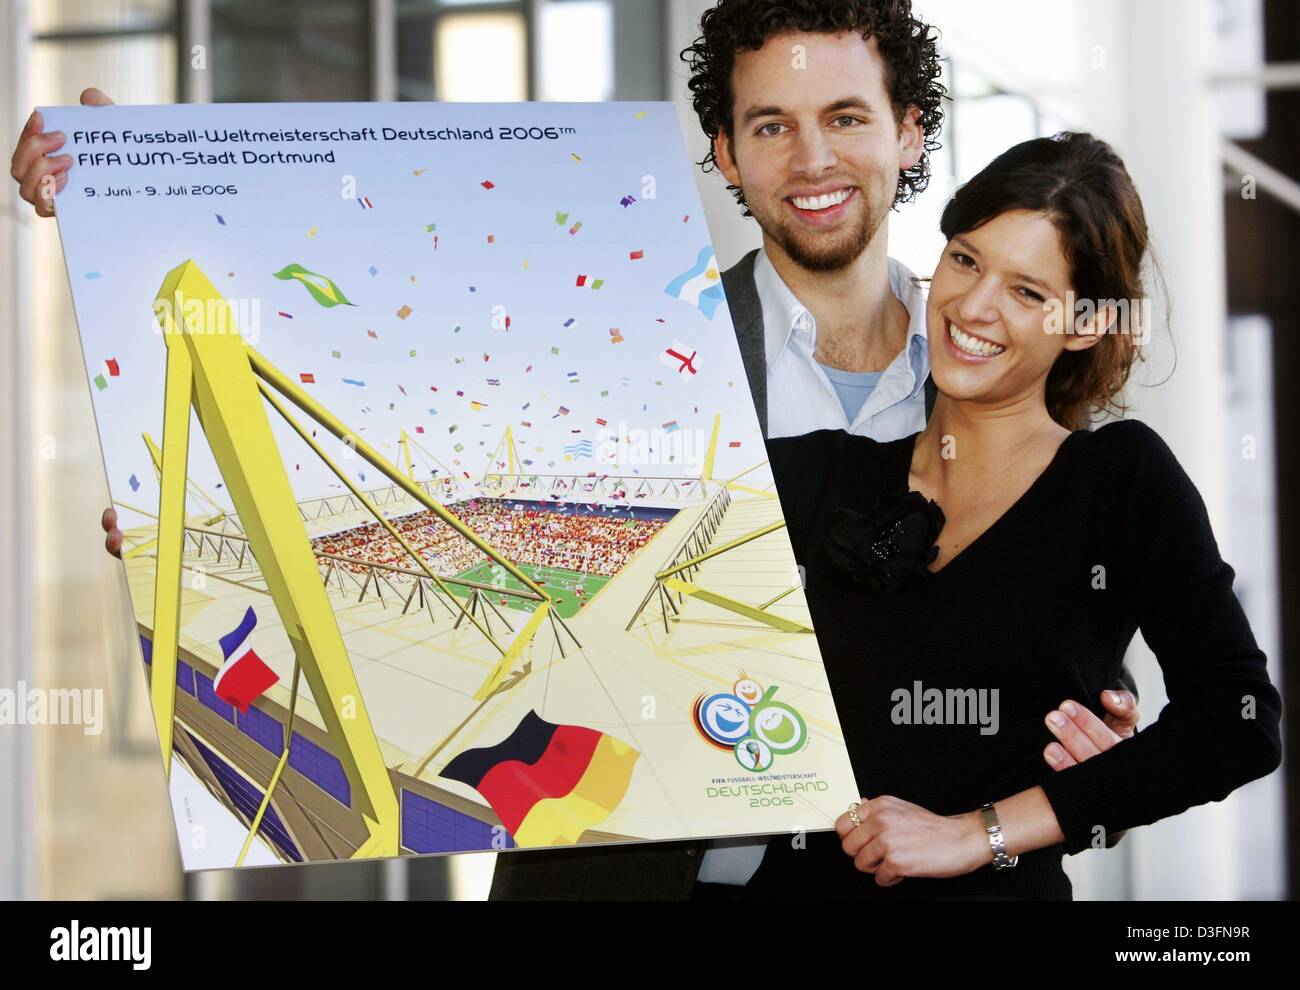 (dpa) - College students Oliver Koetting (l) and Kathrin Winkler present their design which has been chosen as the official FIFA Soccer World Cup 2006 poster for the city of Dortmund, Germany, 24 November 2004. The poster was chosen out of 70 poster entries and shows Dortmund's Westfalenstadion which will host six games during the World Cup in 2006. Stock Photo